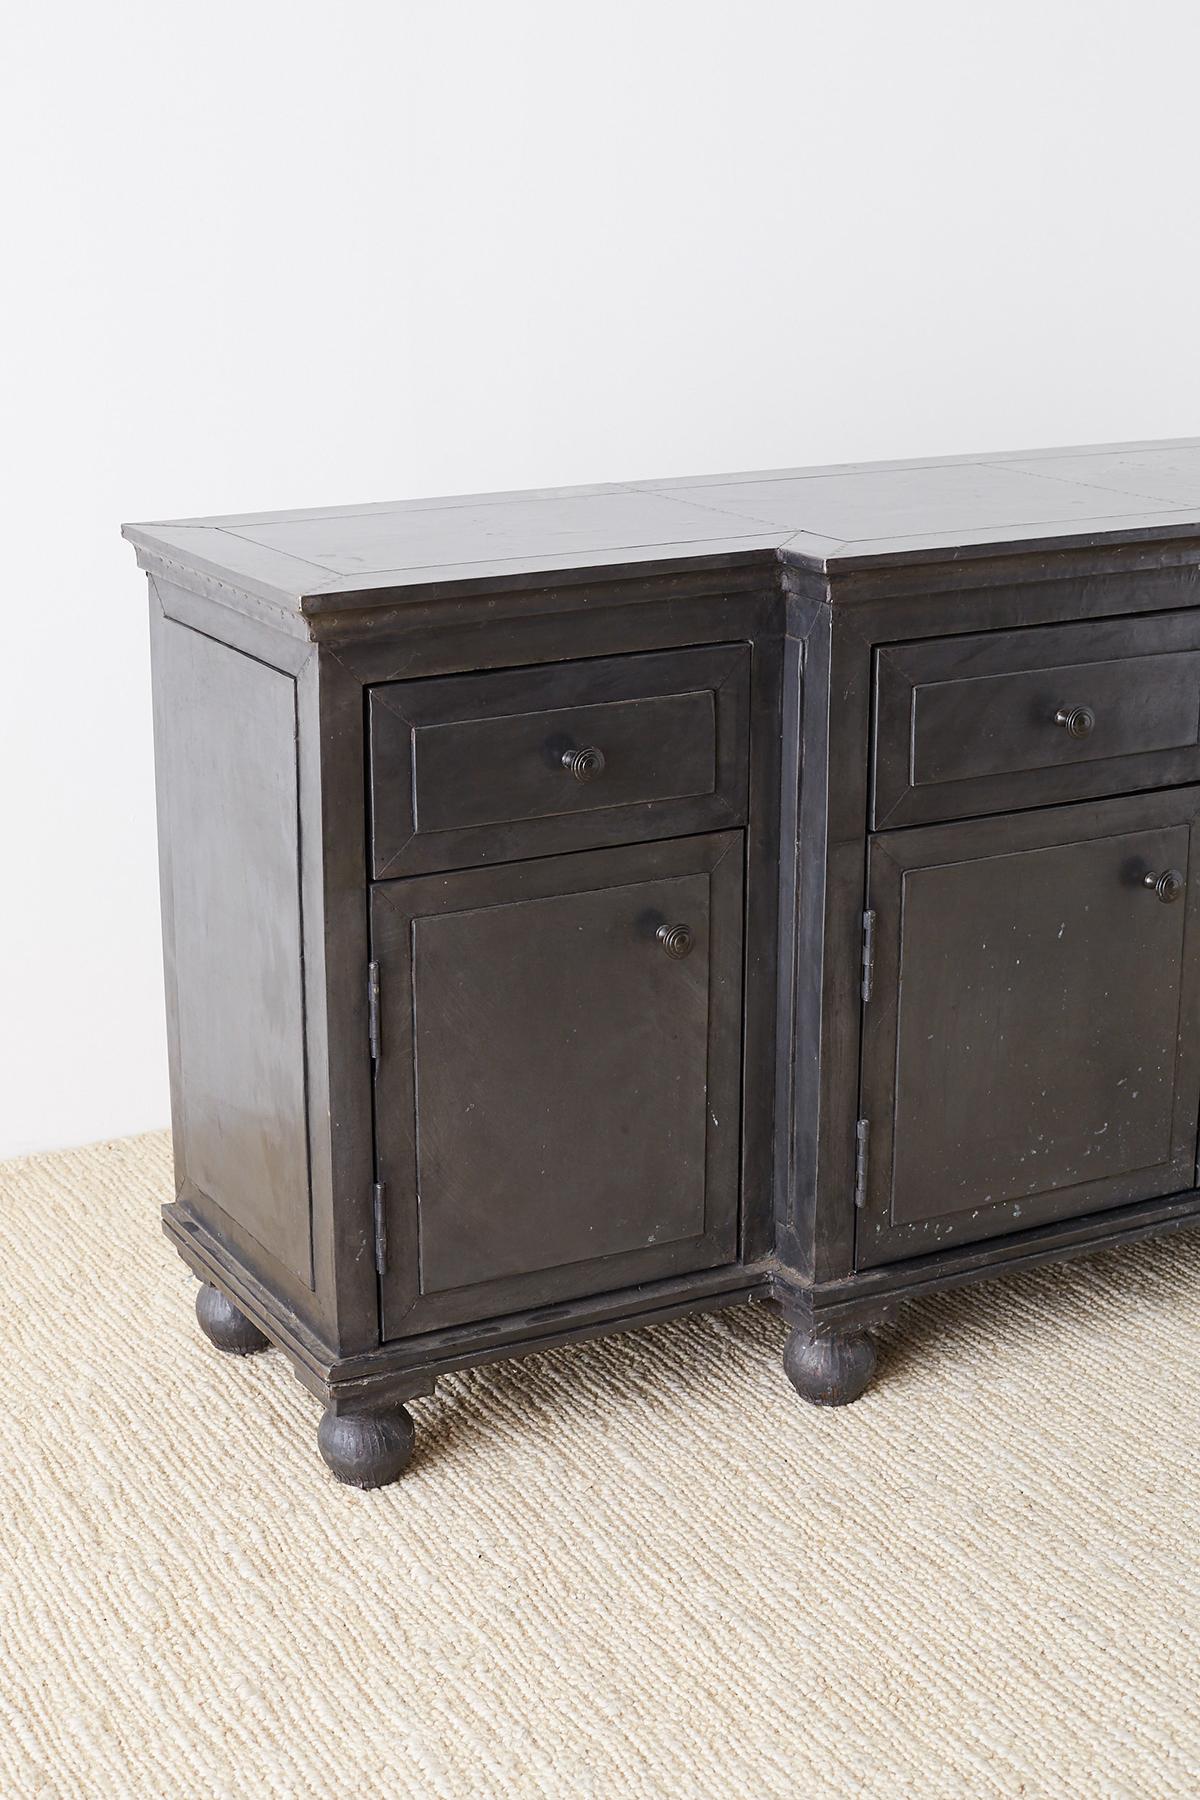 Industrial Zinc Metal Wrapped Sideboard Credenza or Buffet